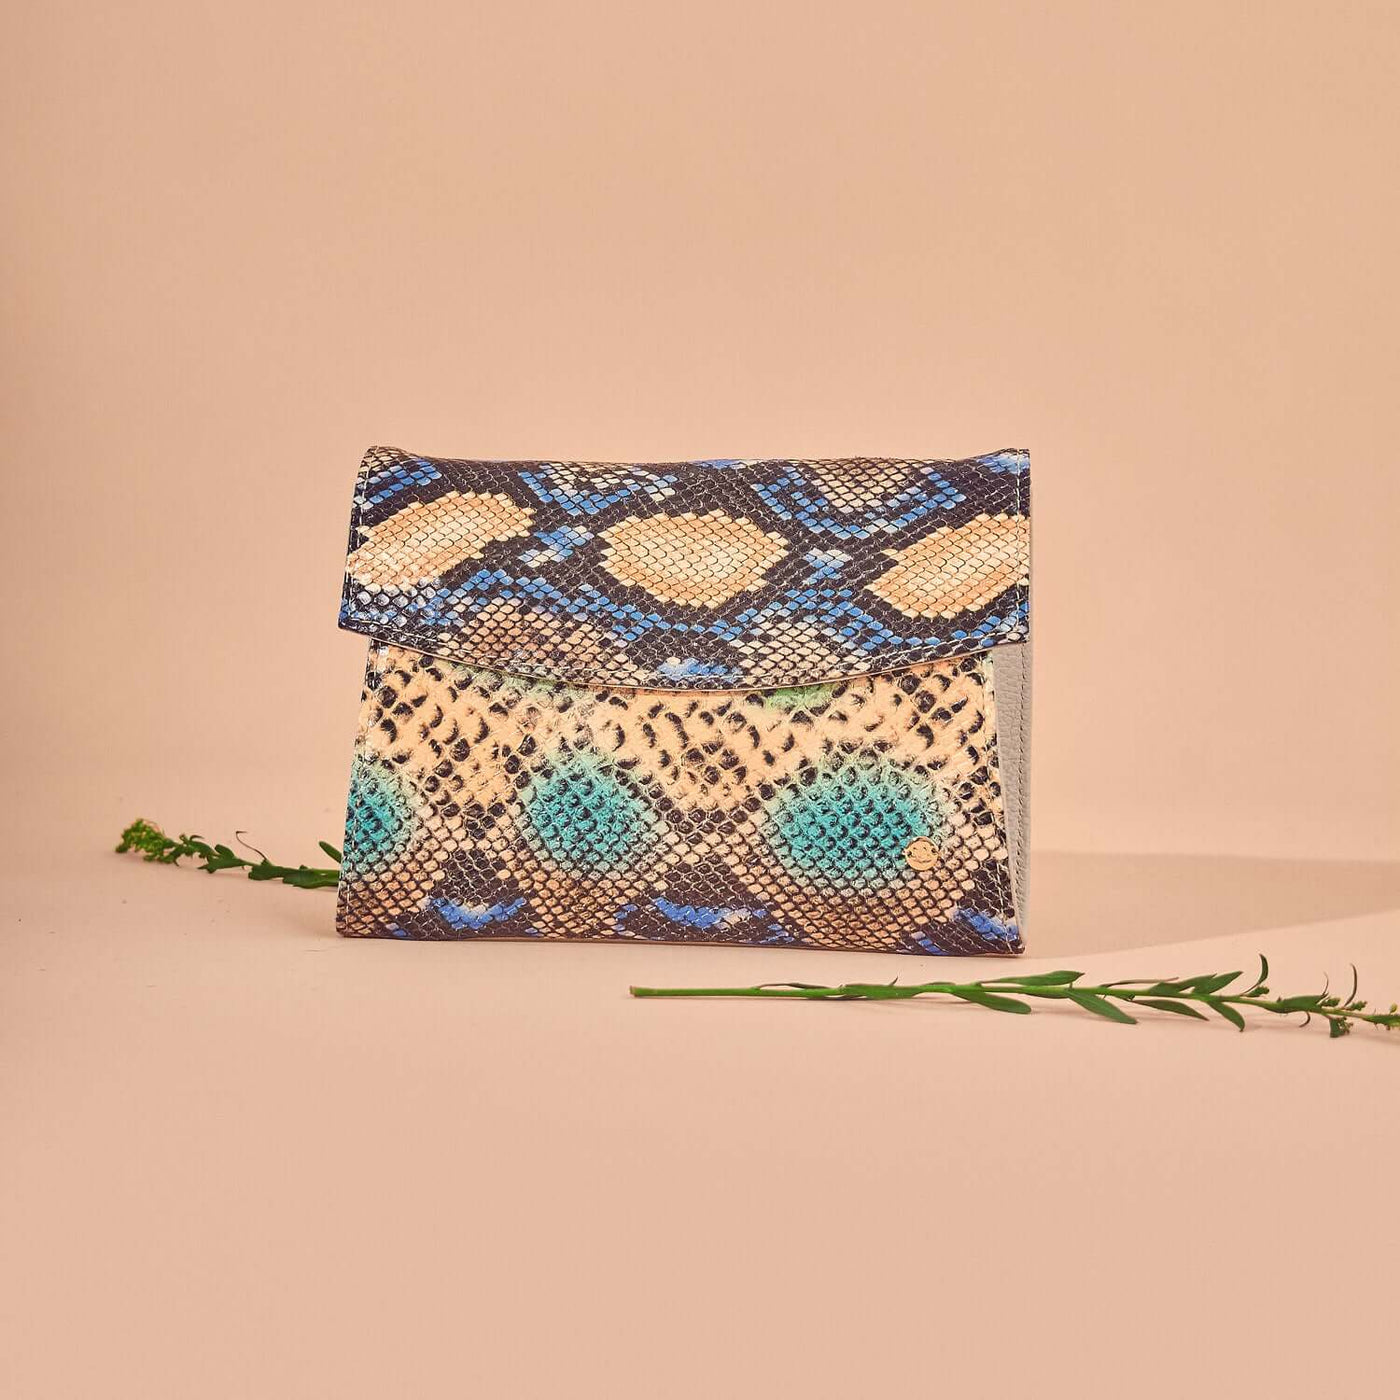 Lady Colorful Clutch